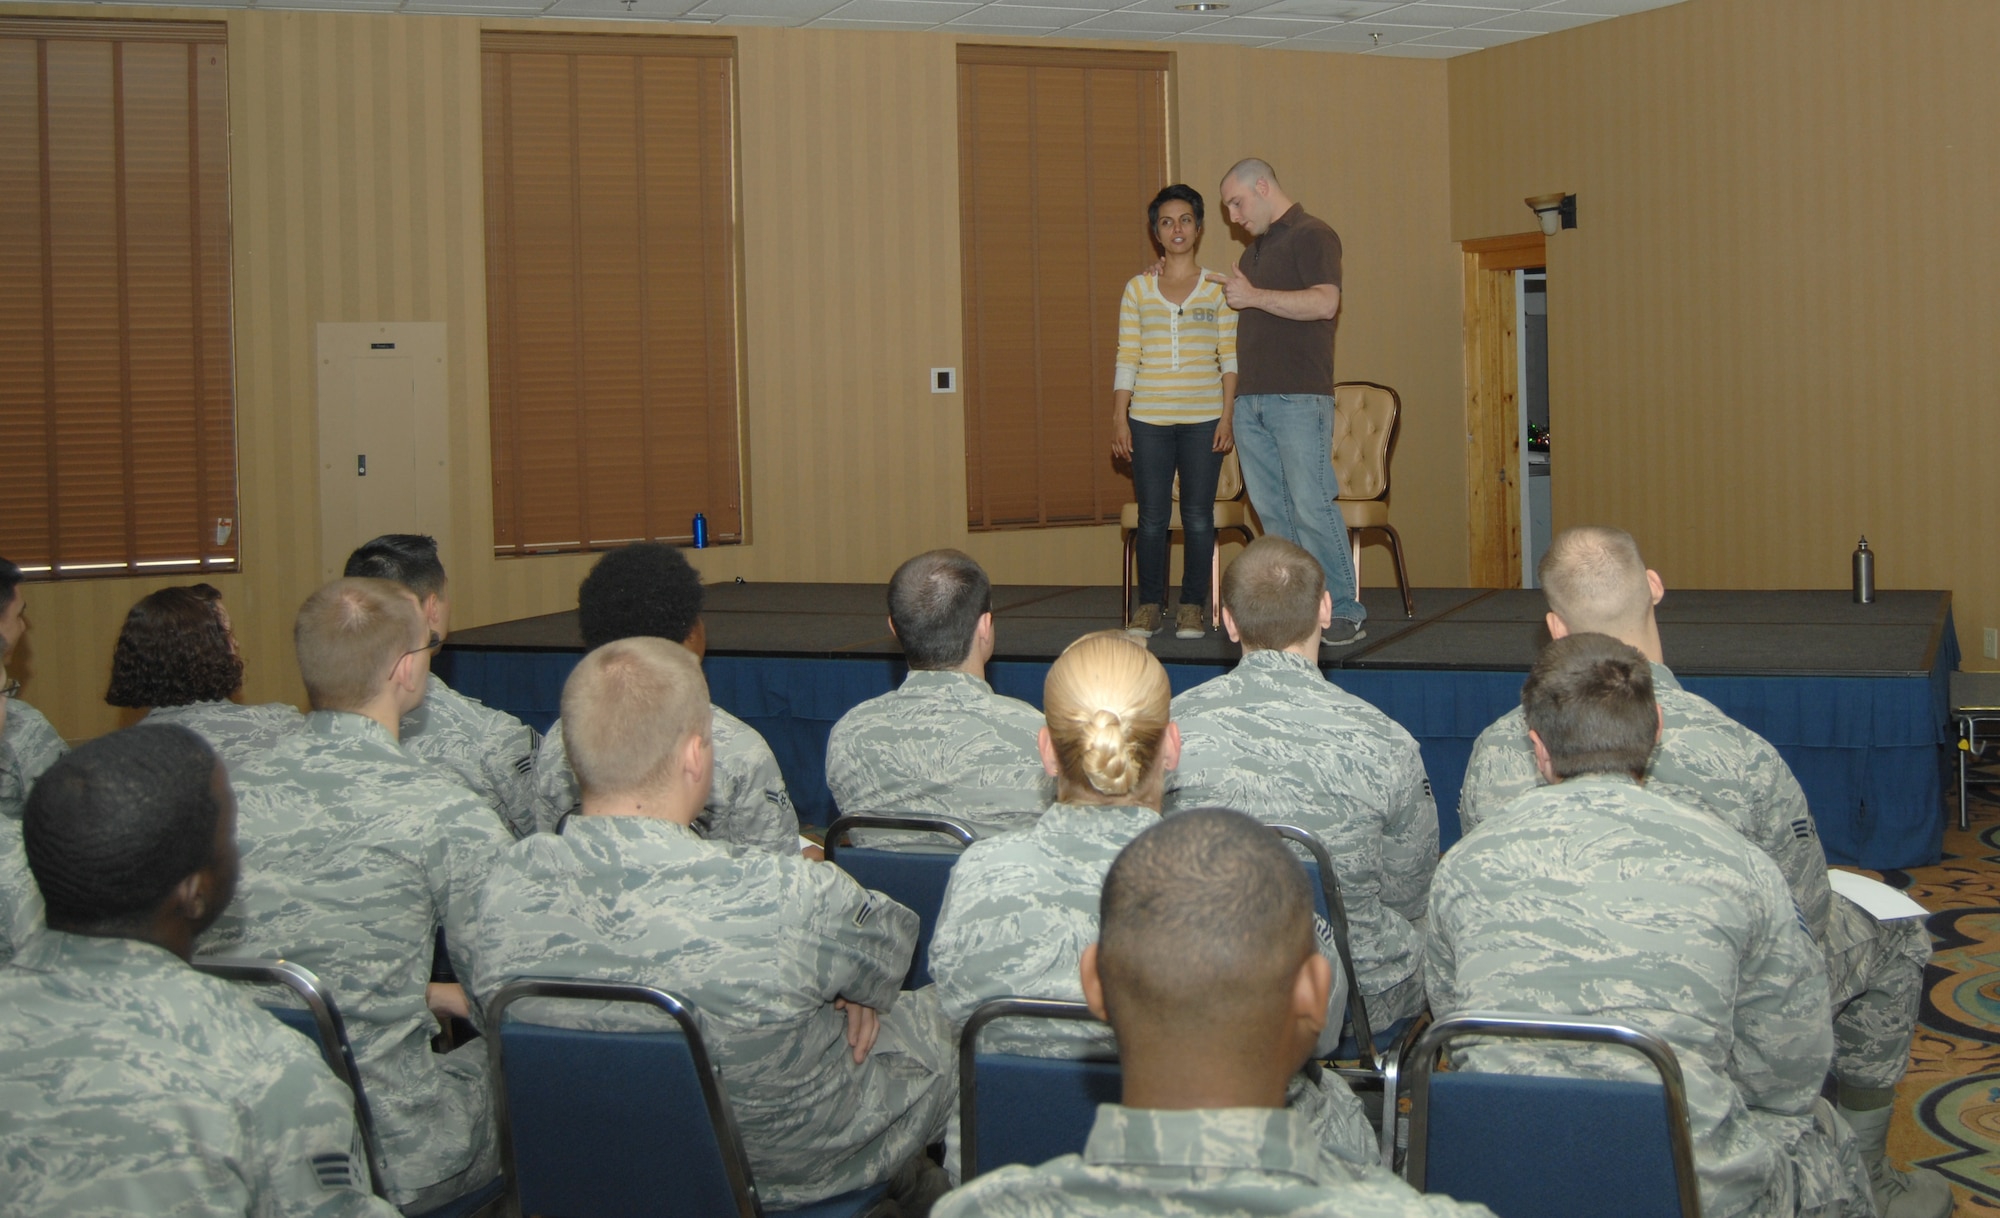 Fawzia Mirza and George Zerante, Sex Signals actors, perform in front of Airmen at the Mirage Club on Davis-Monthan Air Force Base, Ariz., April 10. Sex Signals is an improvised, two-person presentation geared to educate Airmen about the stereotypes and misconceptions surrounding sexual assault. (U.S. Air Force photo by Airman 1st Class Michael Washburn/Released)